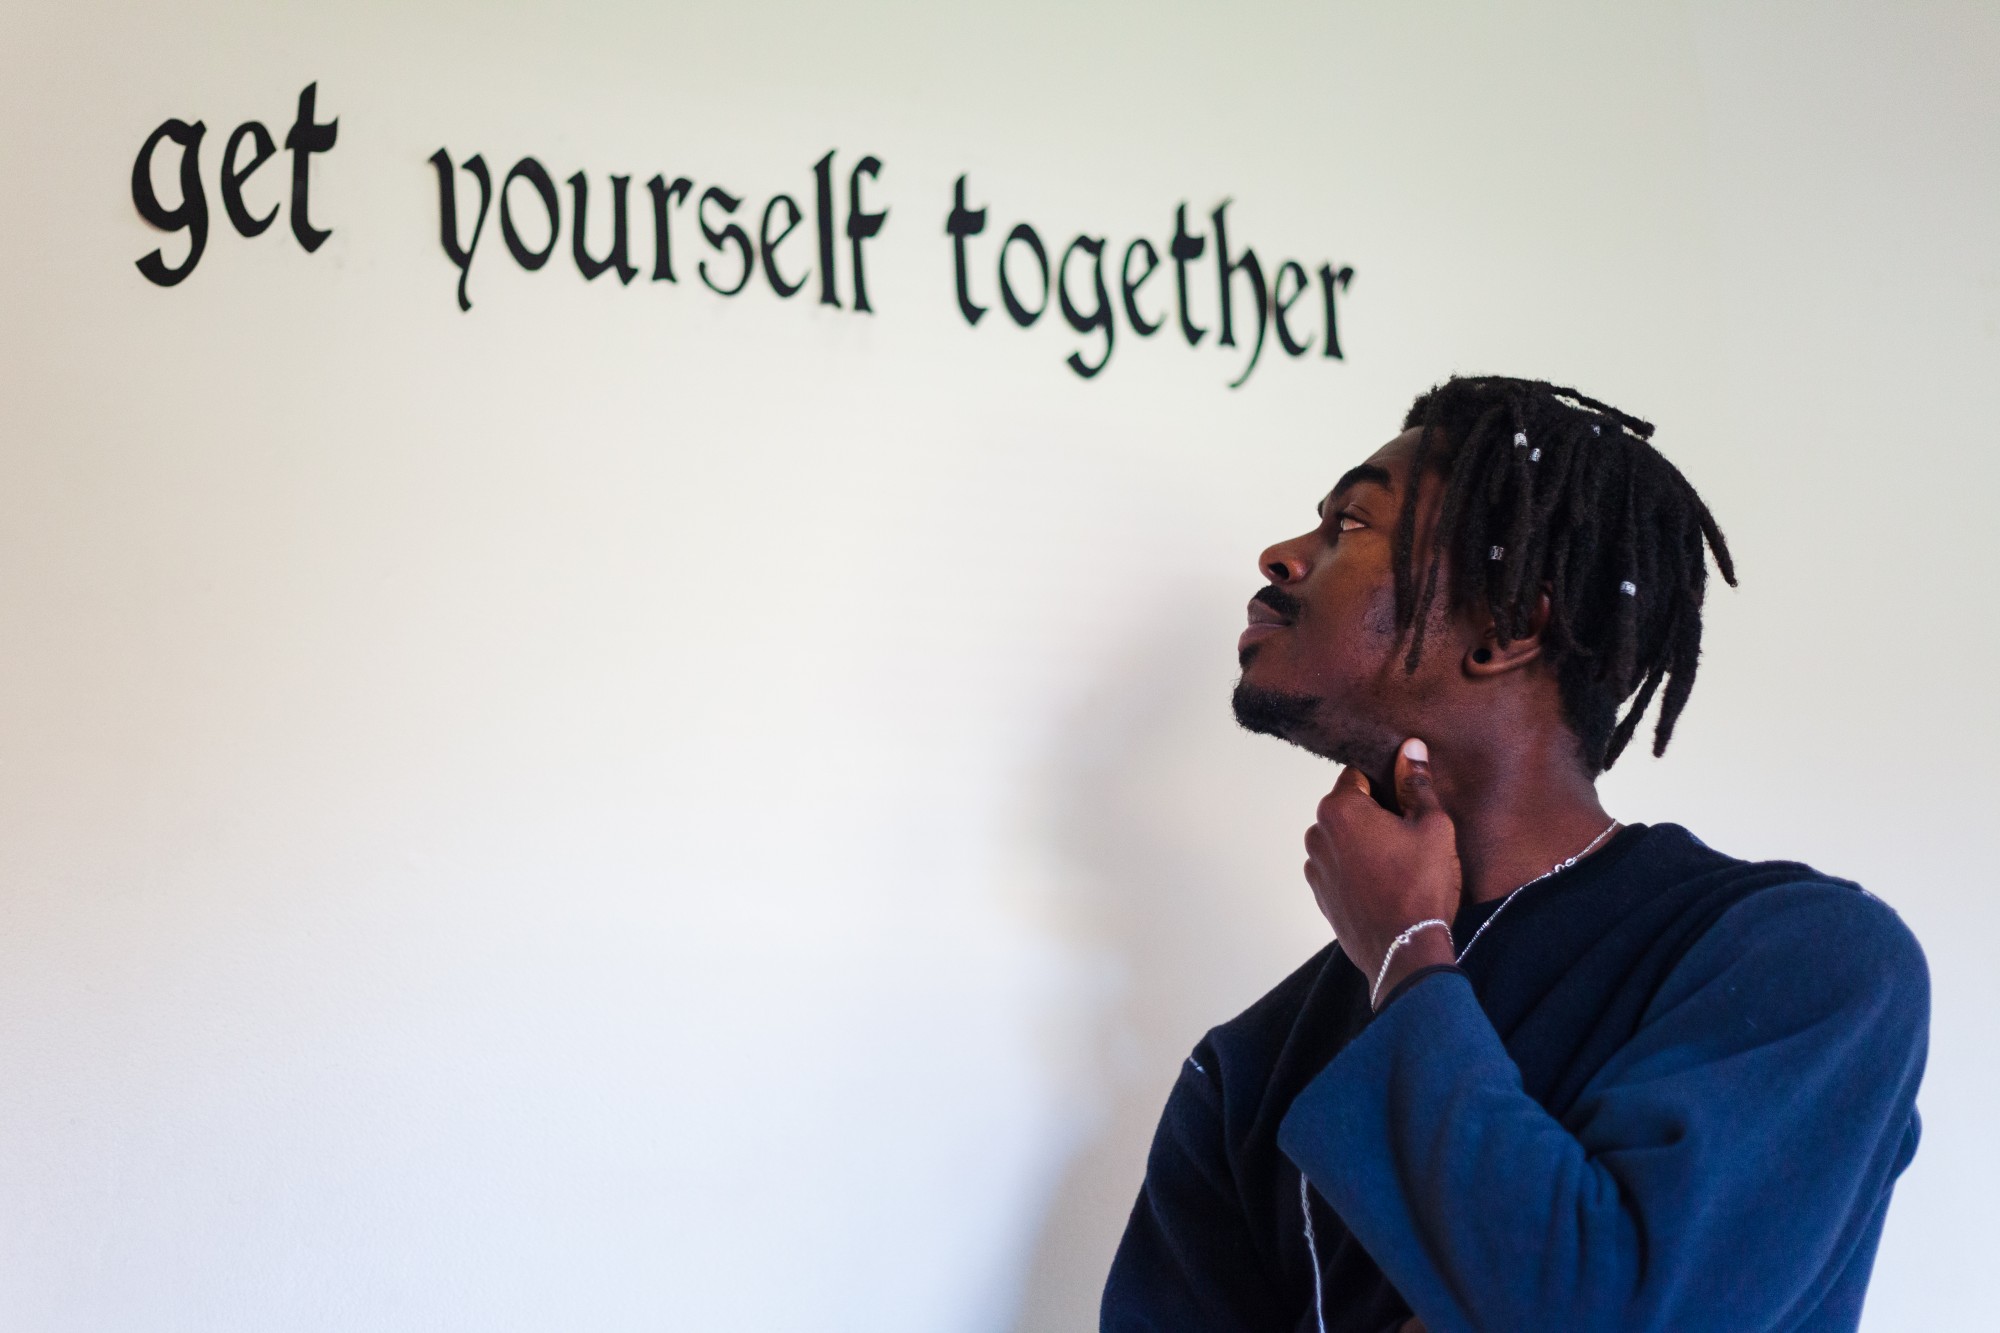 Get Yourself Together, the theme of his recently released apparel line, adorns a wall in Denimanis apartment studio. 